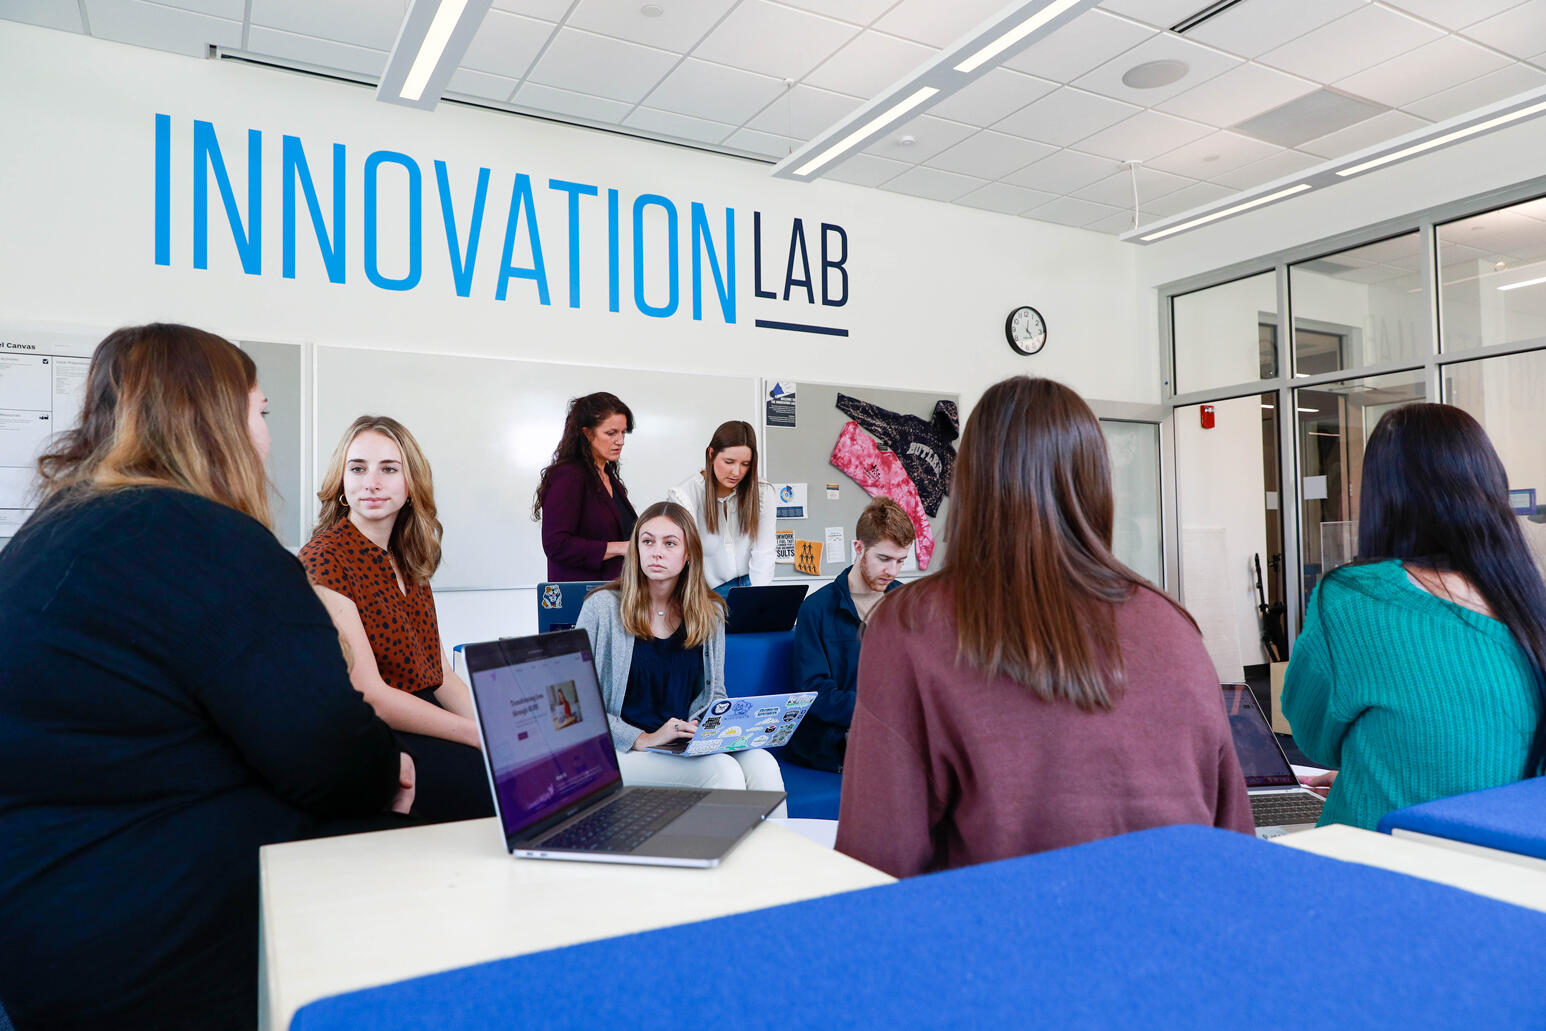 male and female students sitting on blue and white seats. Innovation Lab printed on the white wall